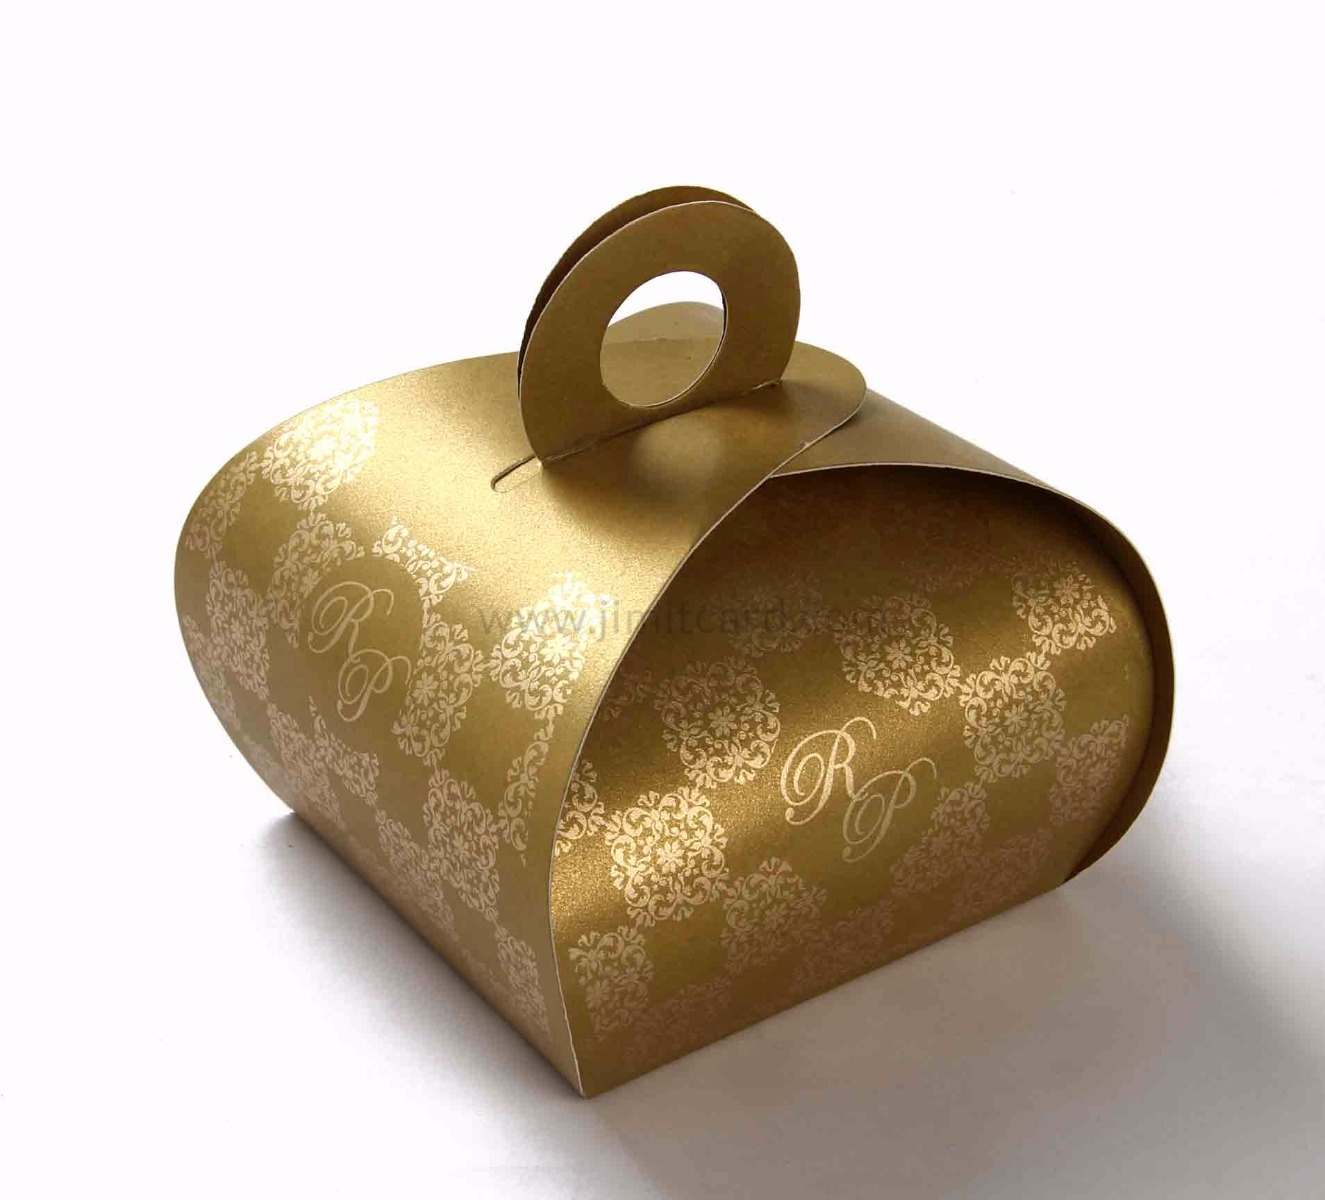 Roll top party Favor Box in Golden Color with a holder